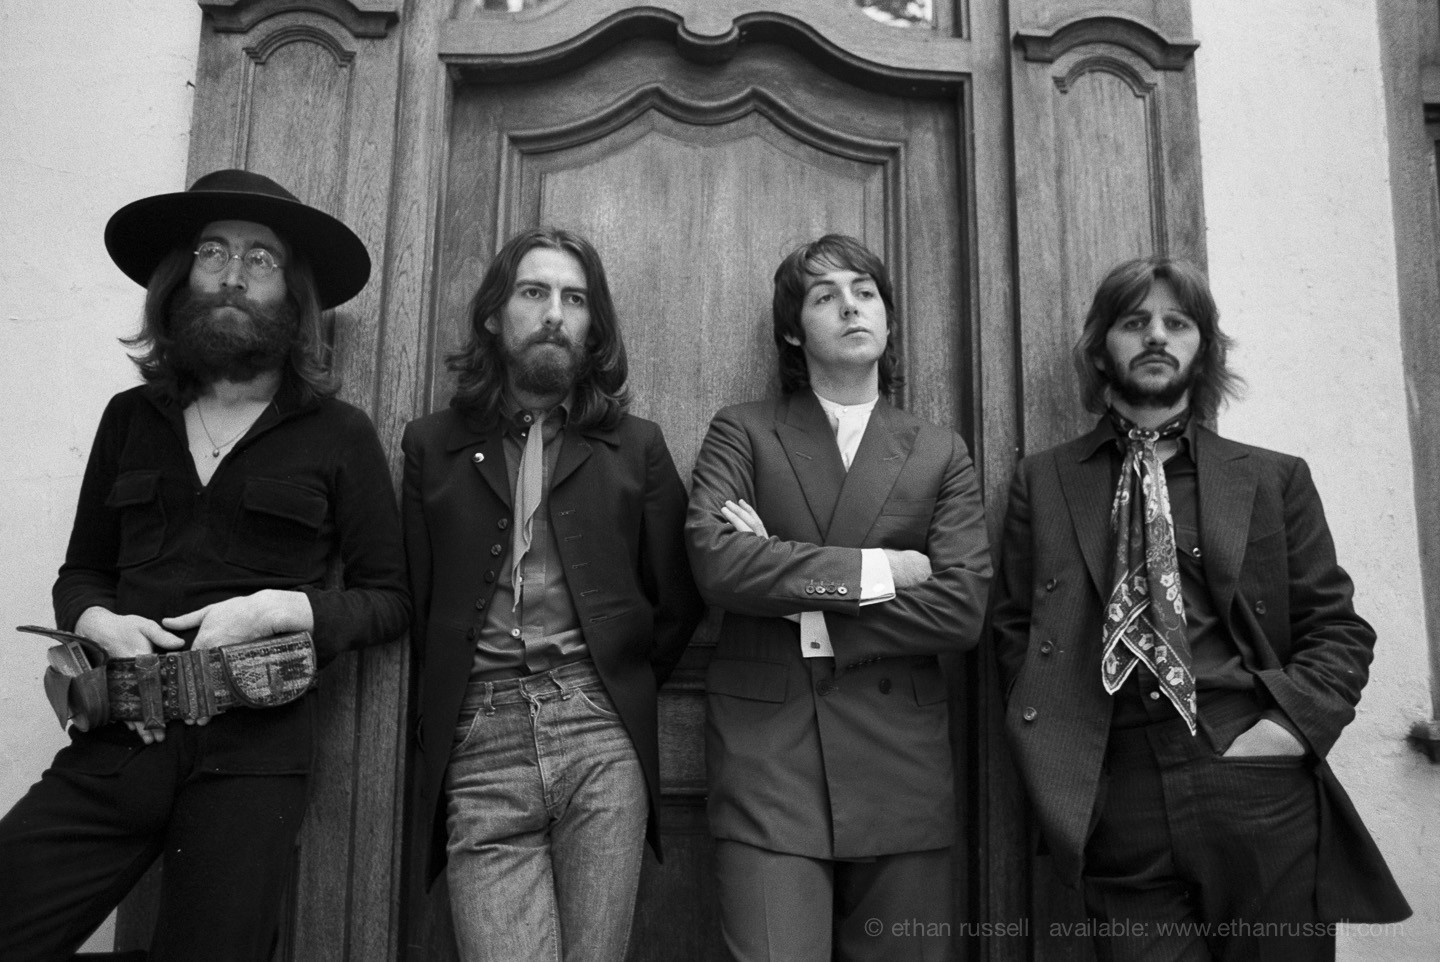 The_Beatles_Last_Session_1969_Ethan_Russell_2048x2048 shop ethanrussell com